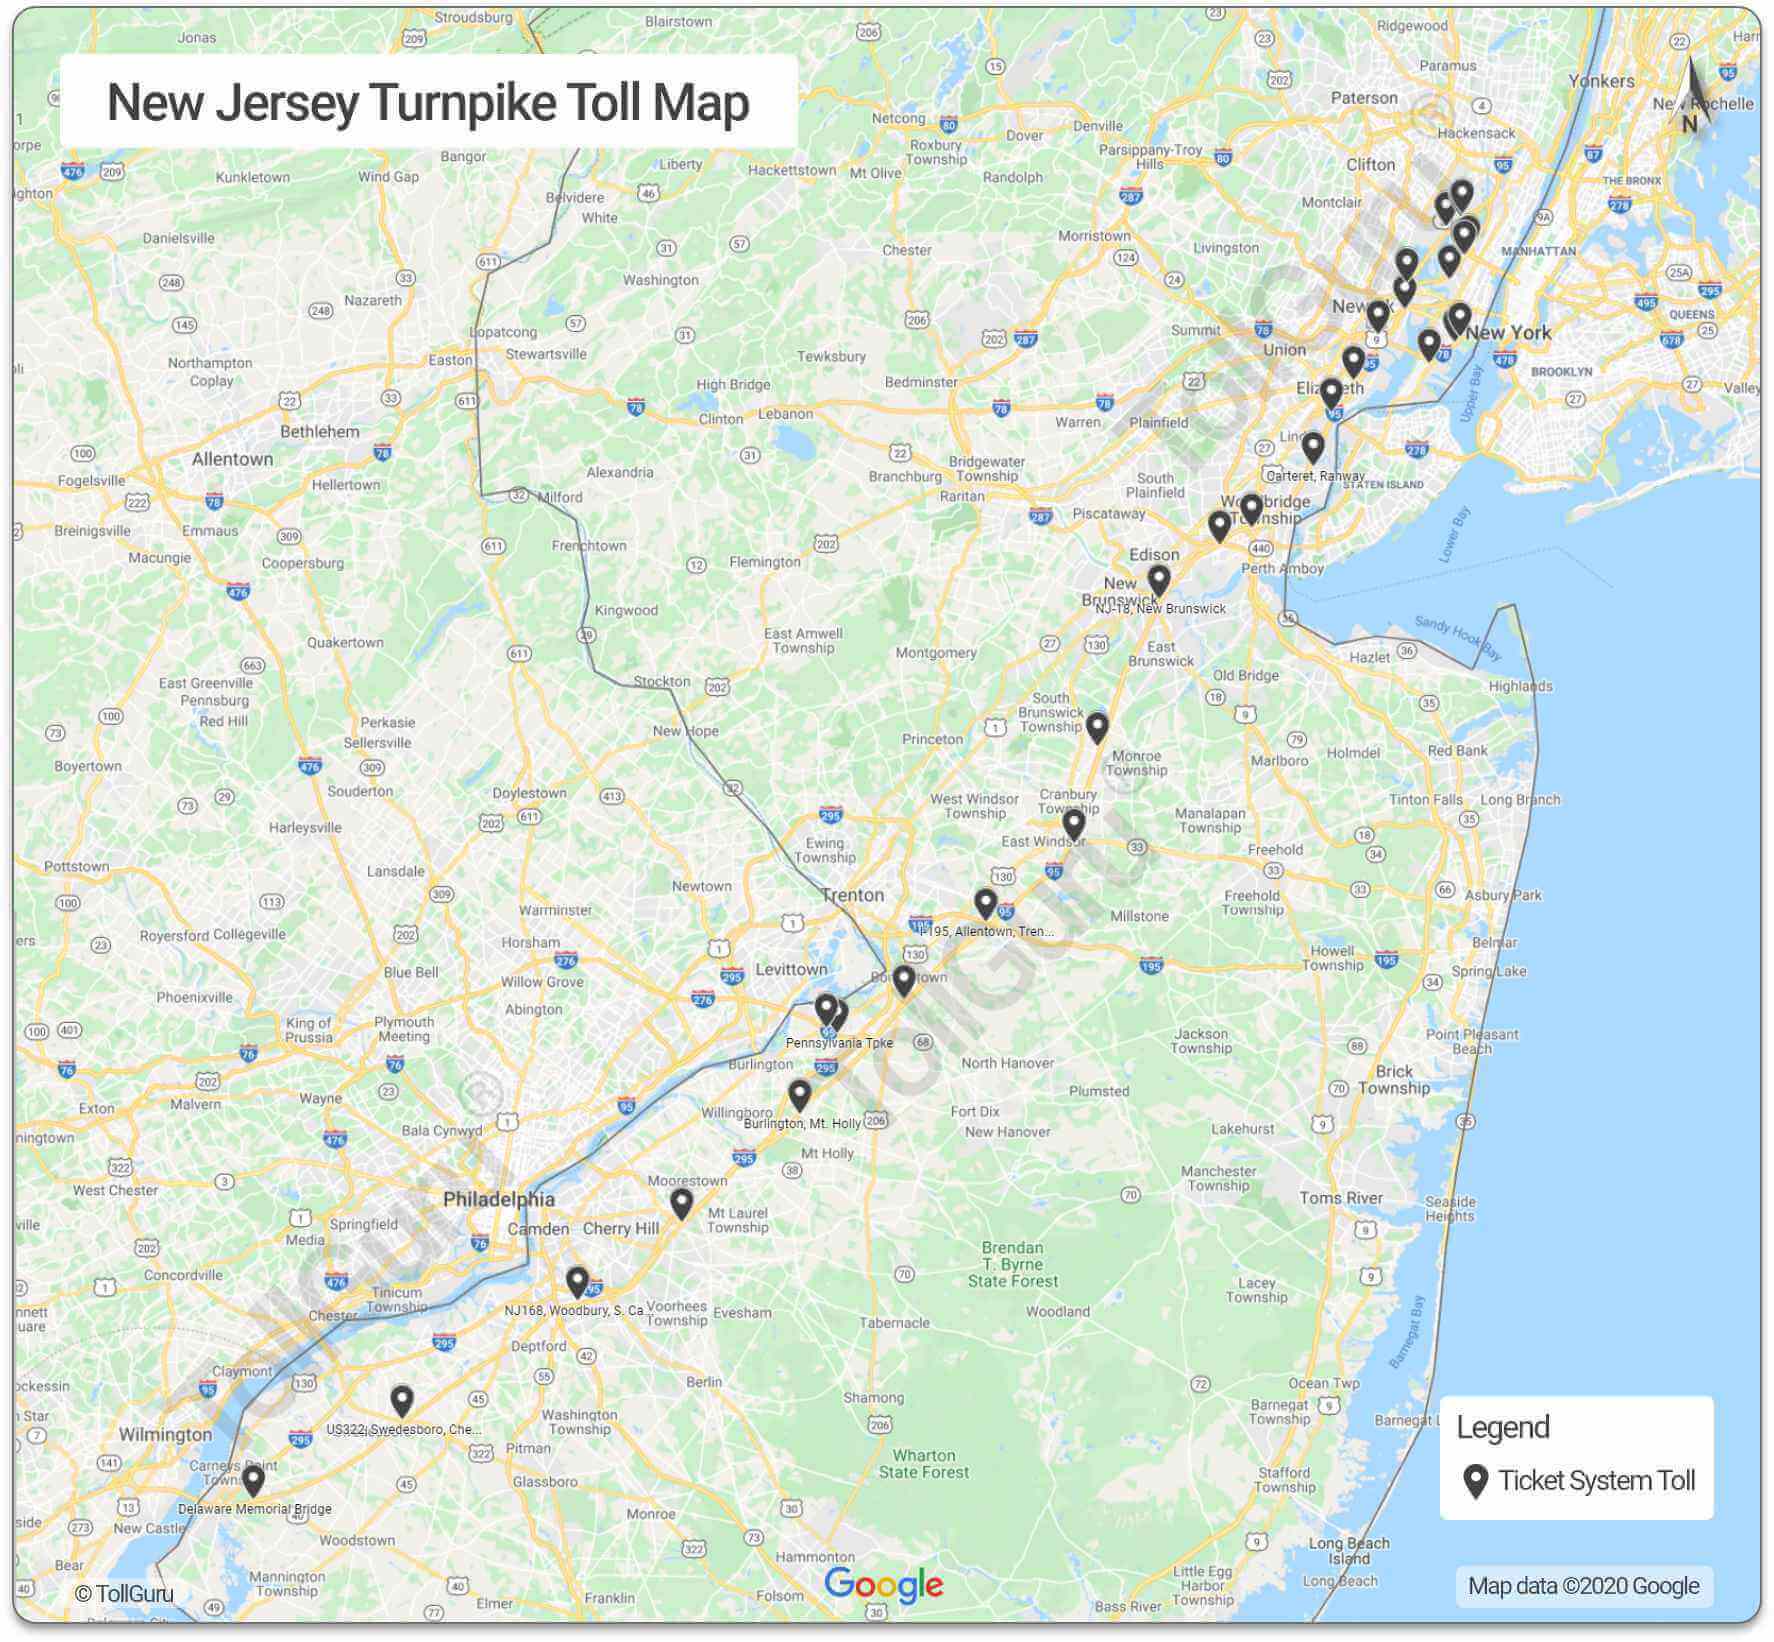 Toll booth locations on all toll roads of New Jersey Turnpike in New Jersey and leading to Delaware, Pennsylvania and New York